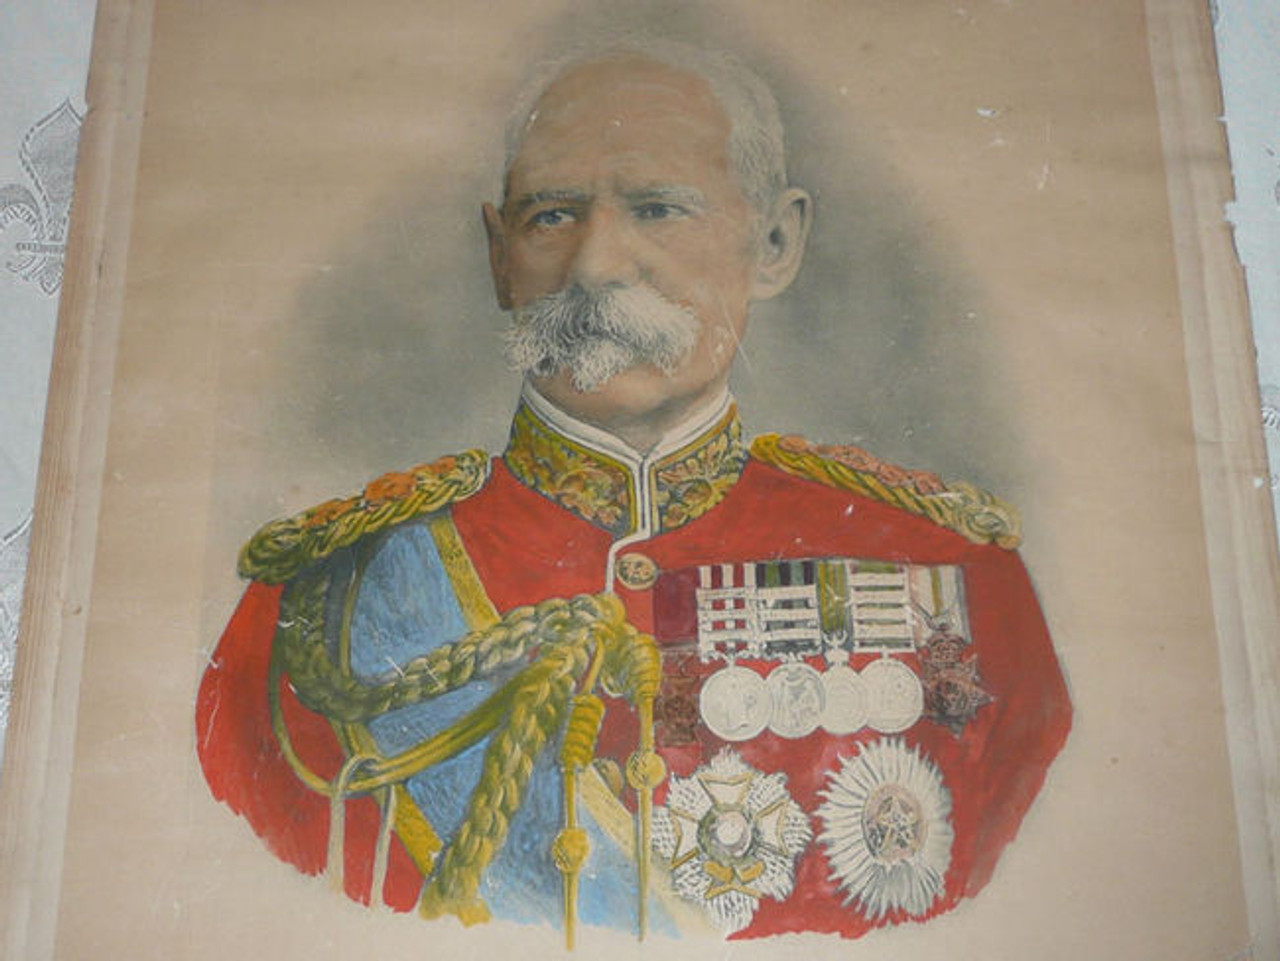 1900 Poster of Field Marshal Lord Roberts, Boer War, 1900, Brittle paper. Some wear, see pictures. 19" x 23"